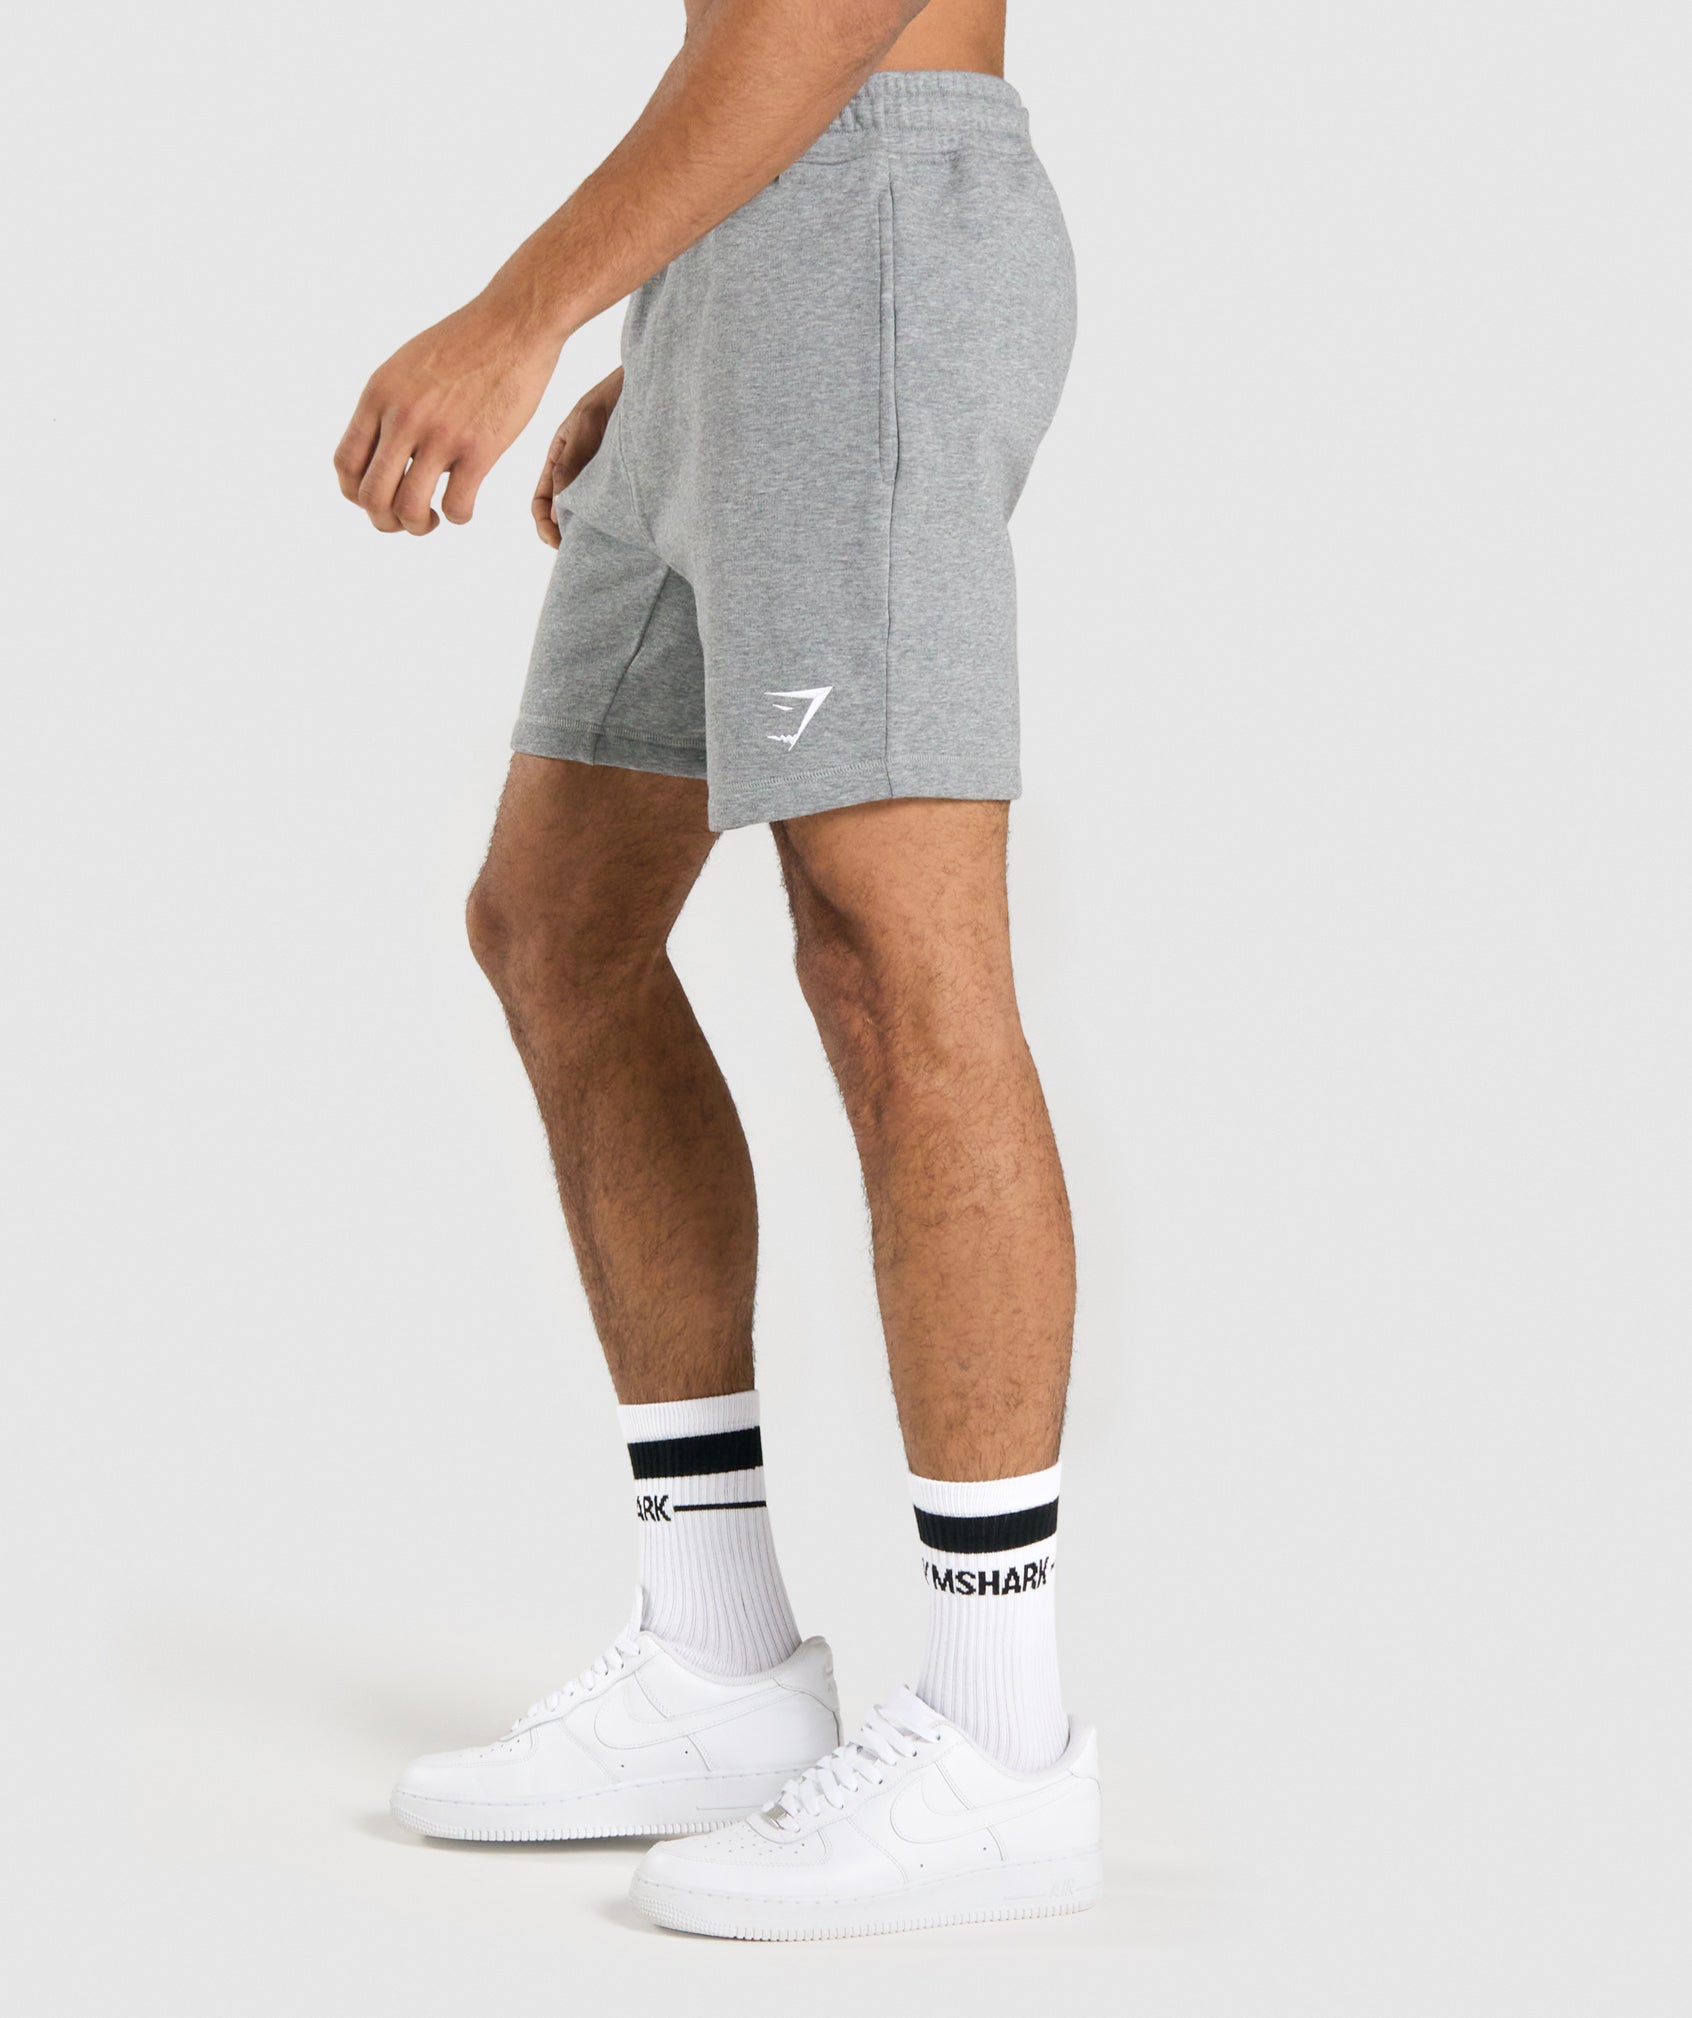 Crest Shorts in Charcoal Marl - view 3